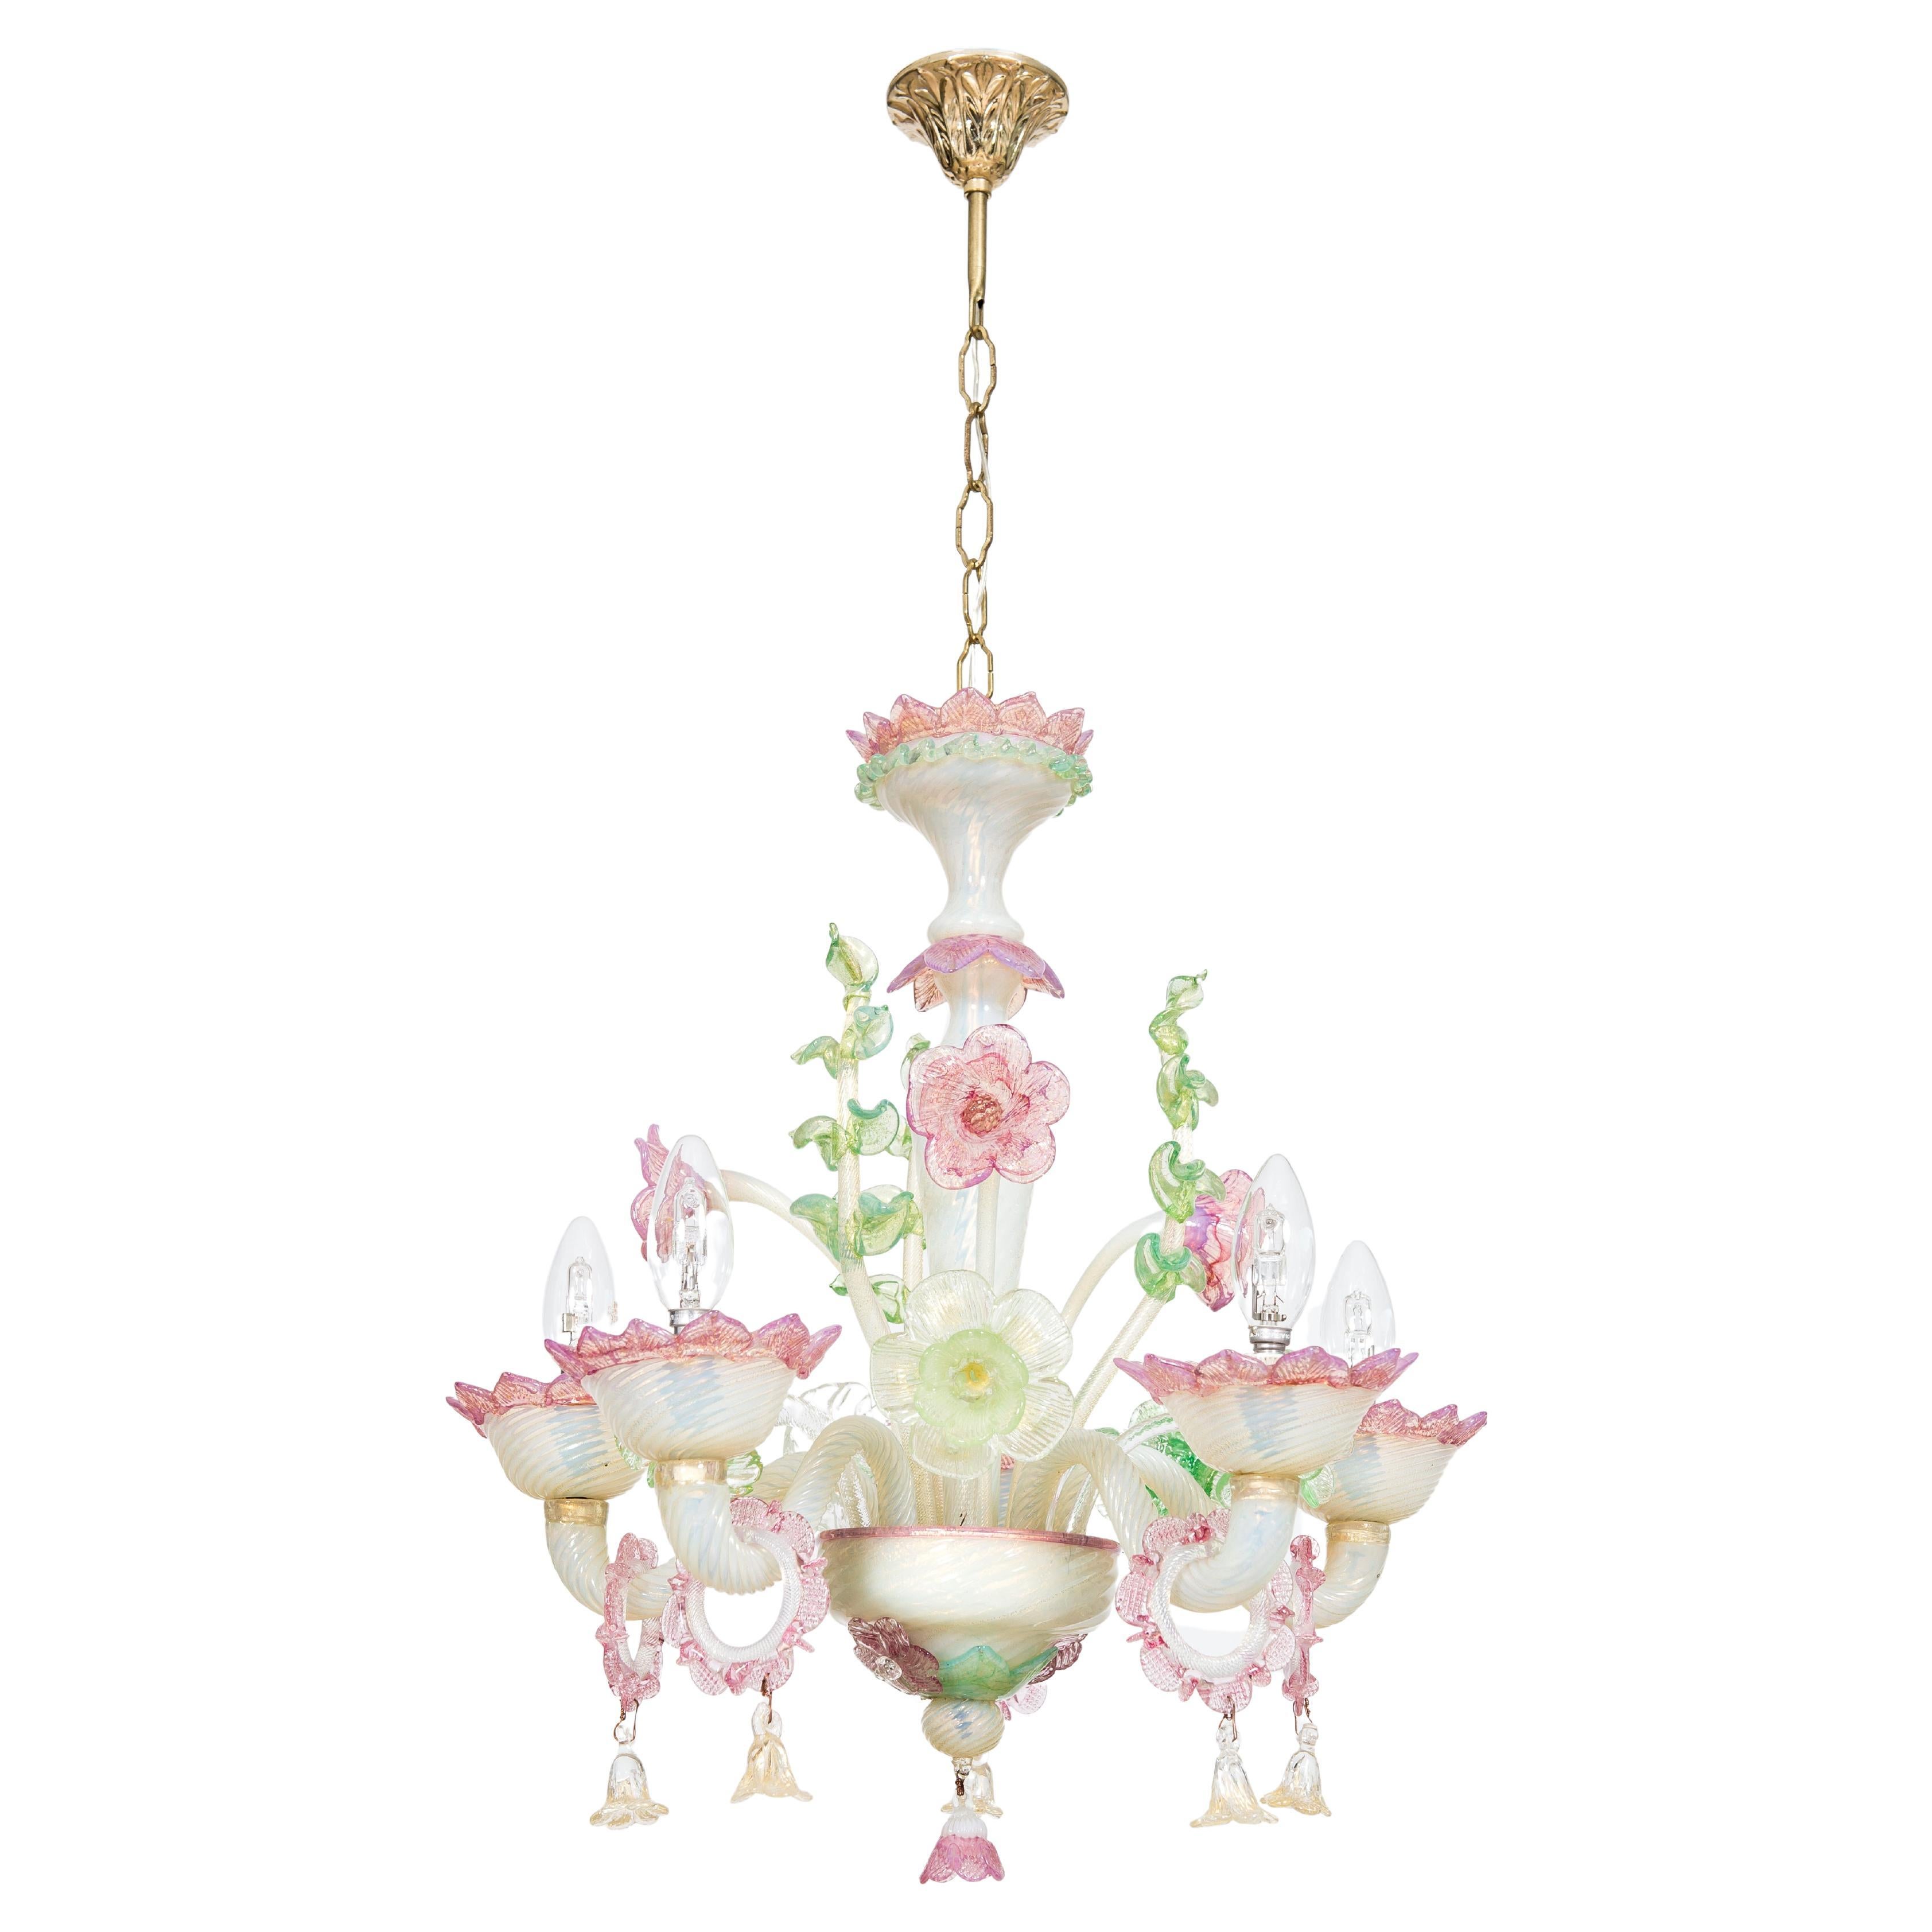 Floral Opaline Murano Glass Chandelier with Gold Handcrafted in Italy 1900s  For Sale